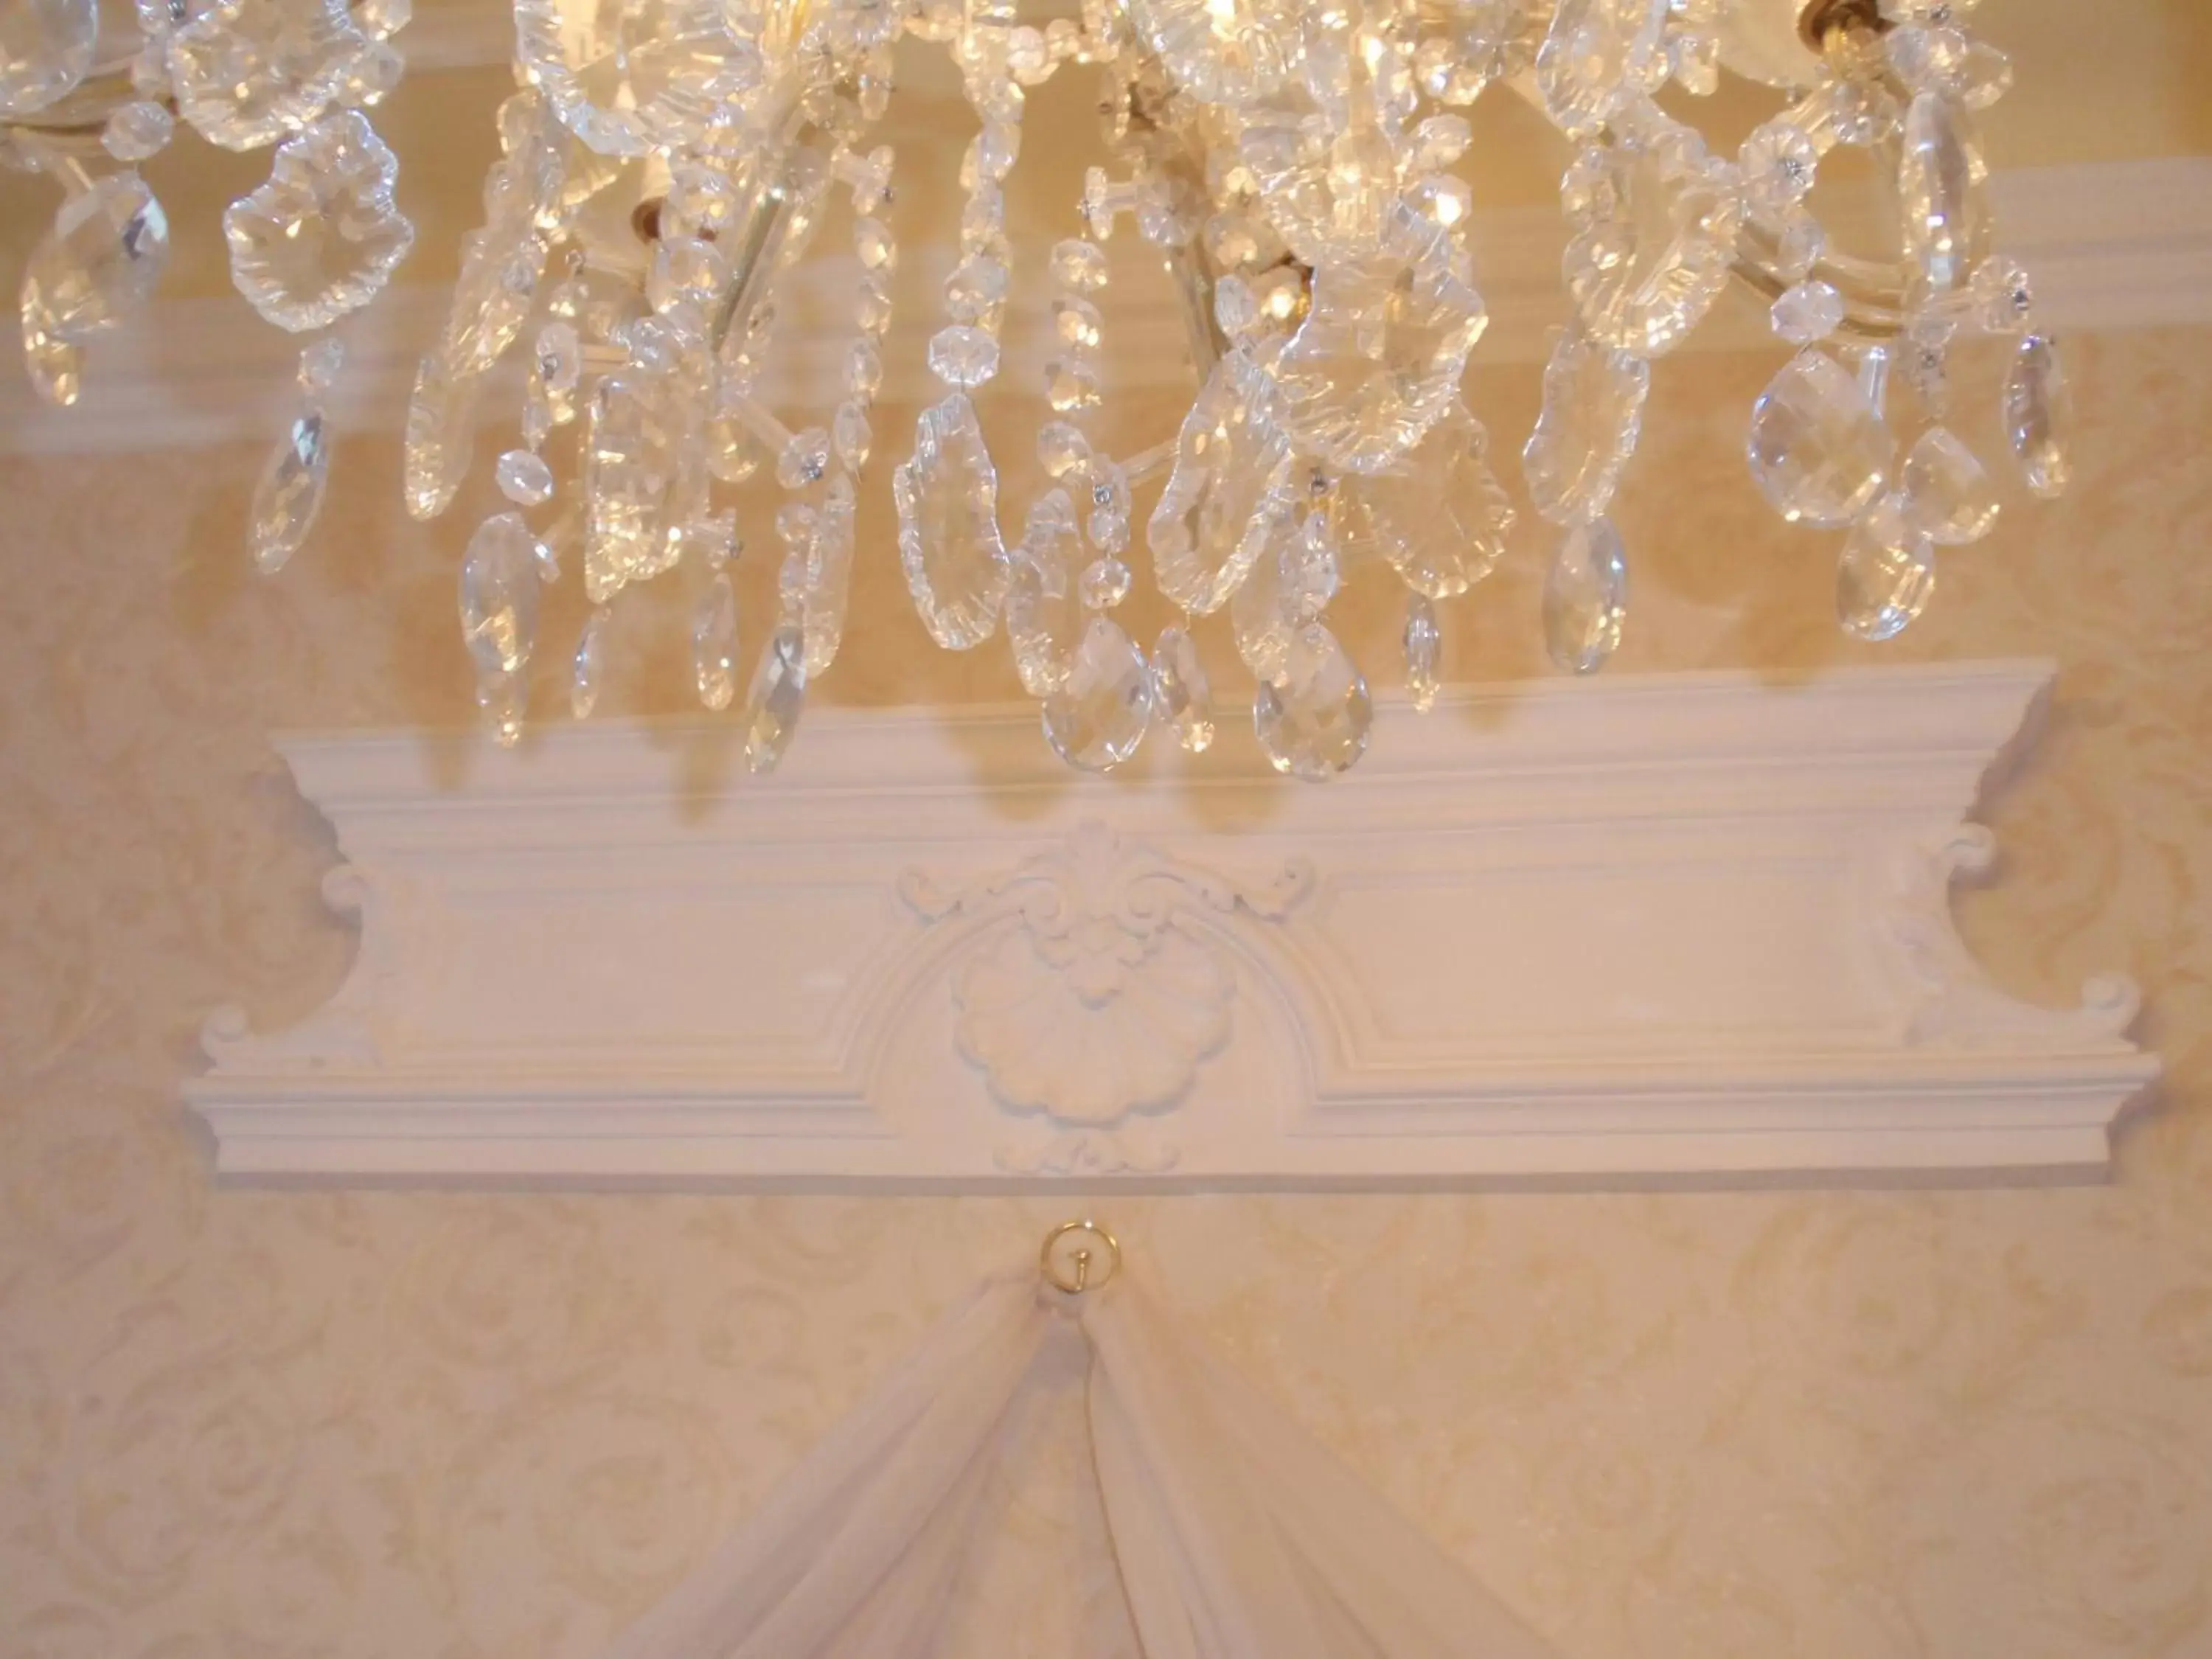 Decorative detail in Aviano Boutiquehotel